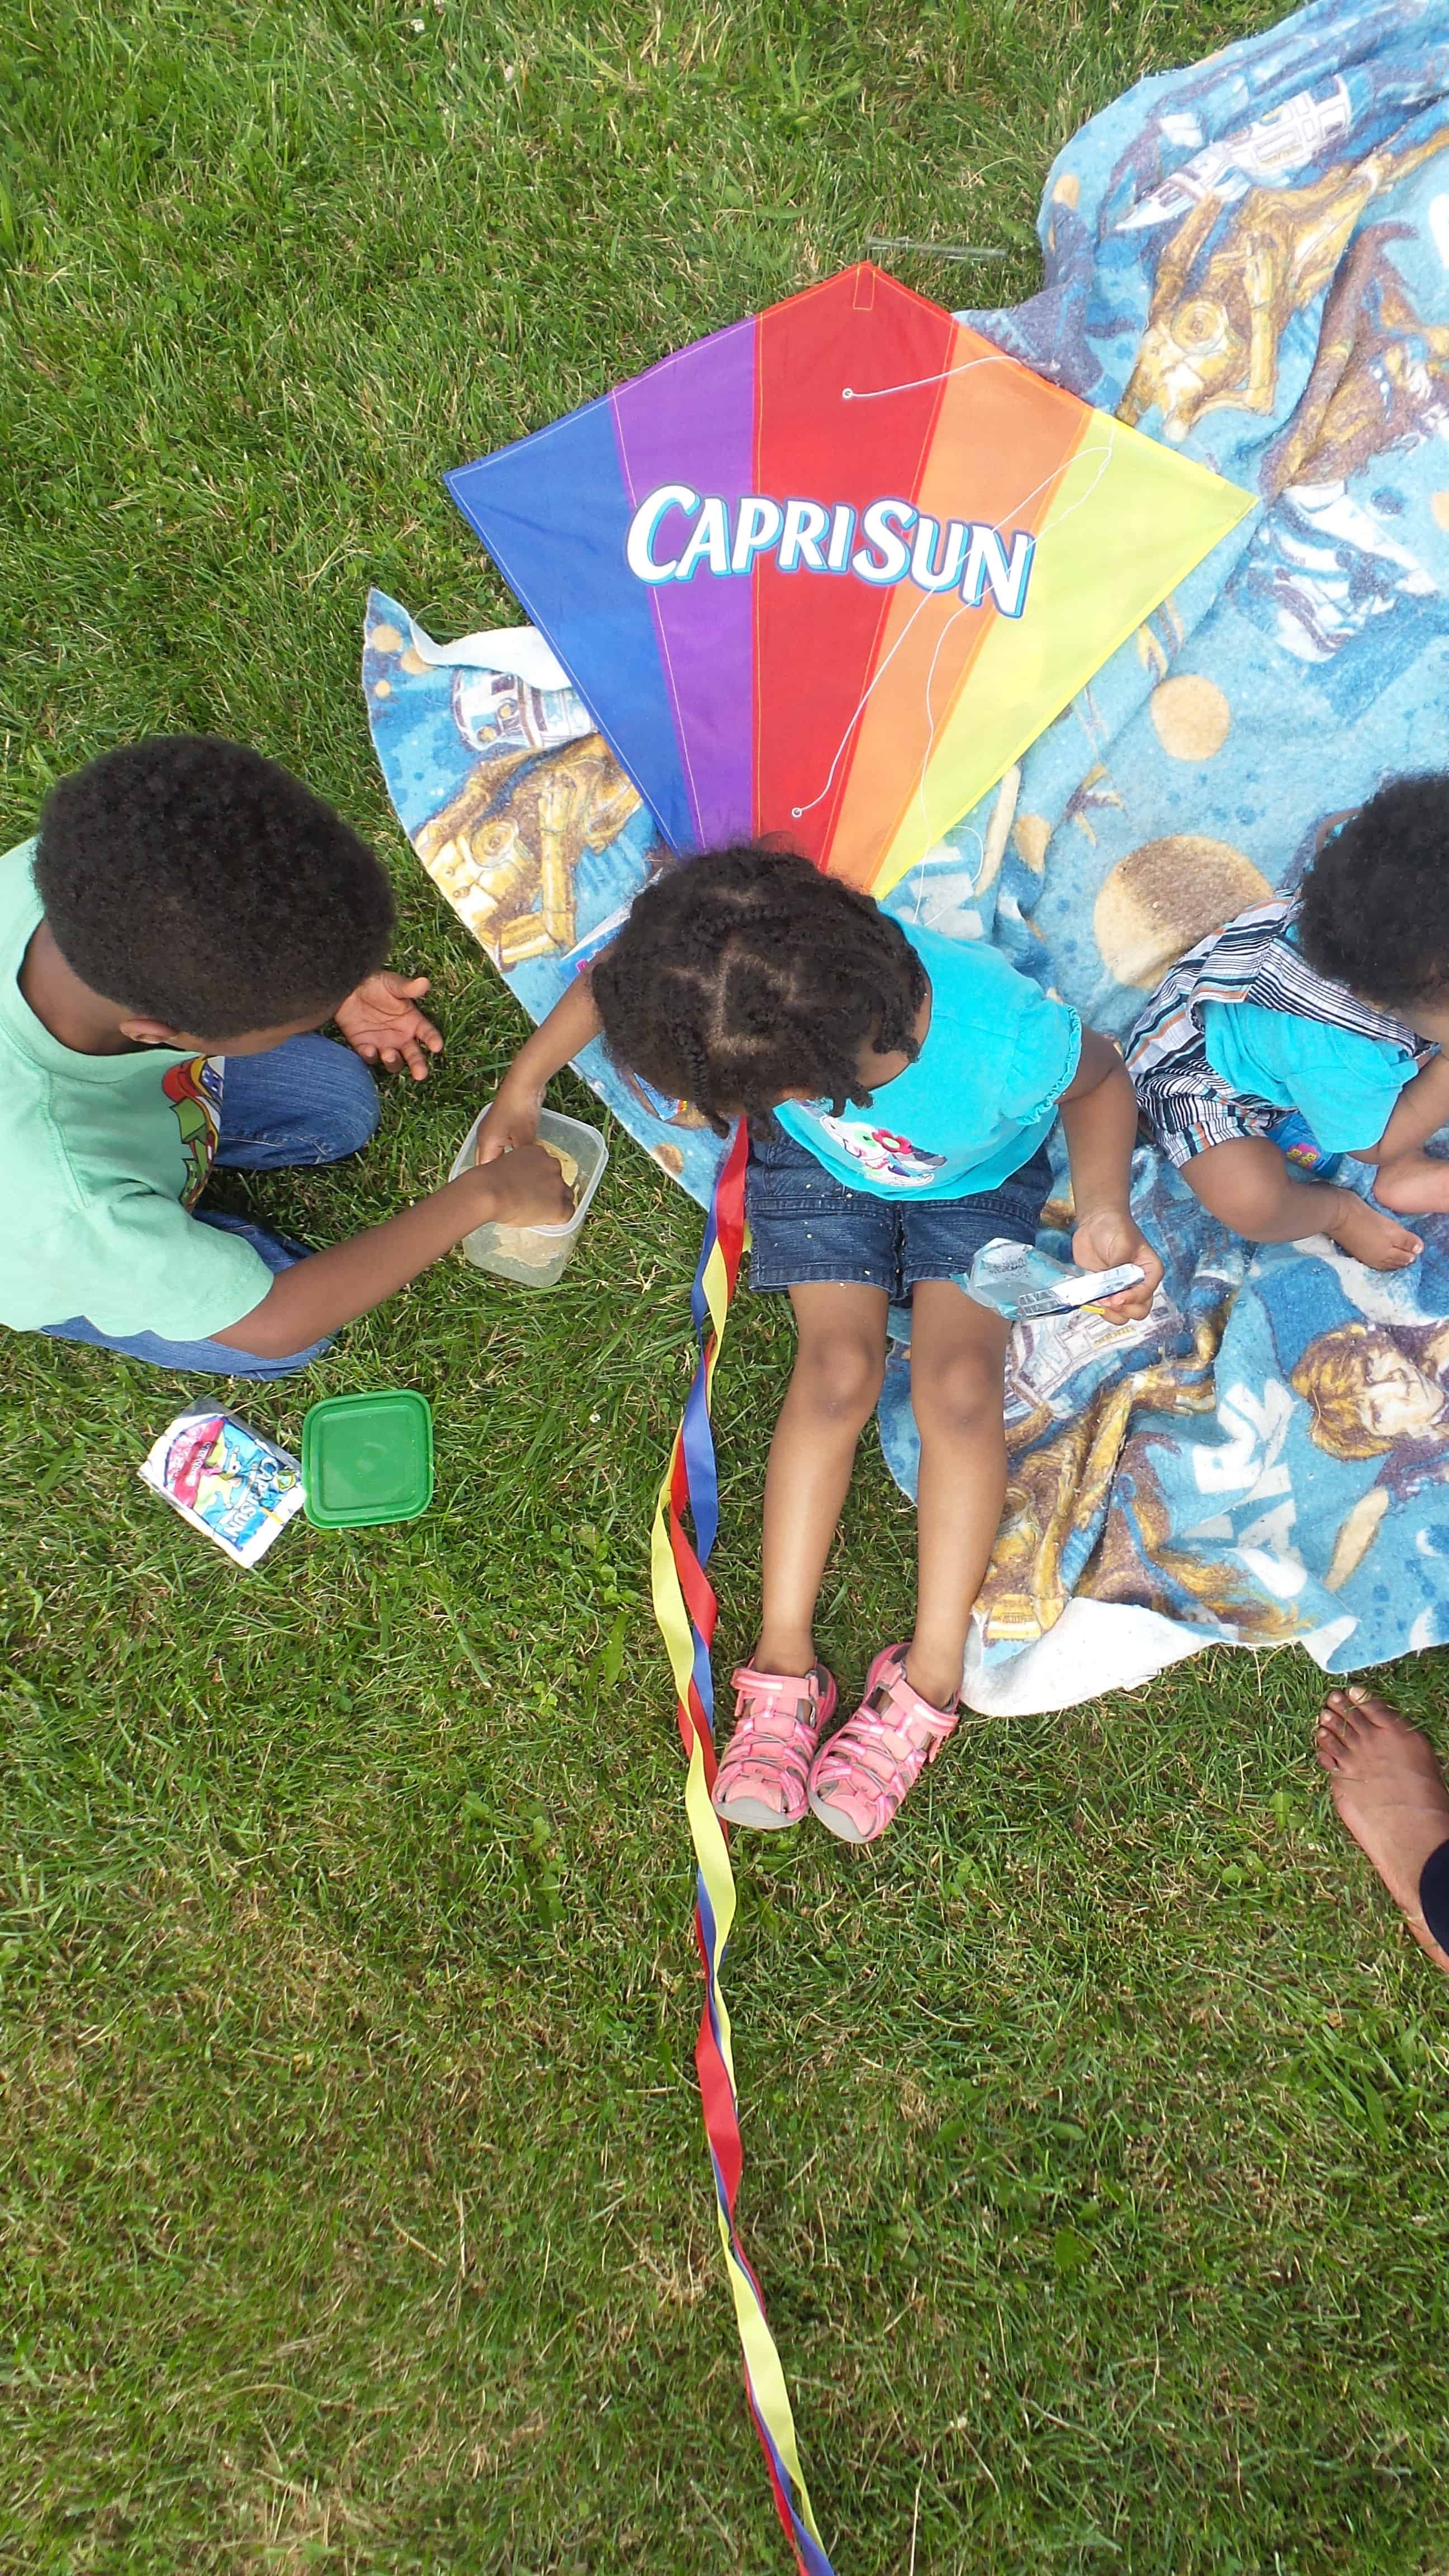 We're taking full advantage of the last days of summer by living it up, and flying a kite #CapriSunCrew Ad